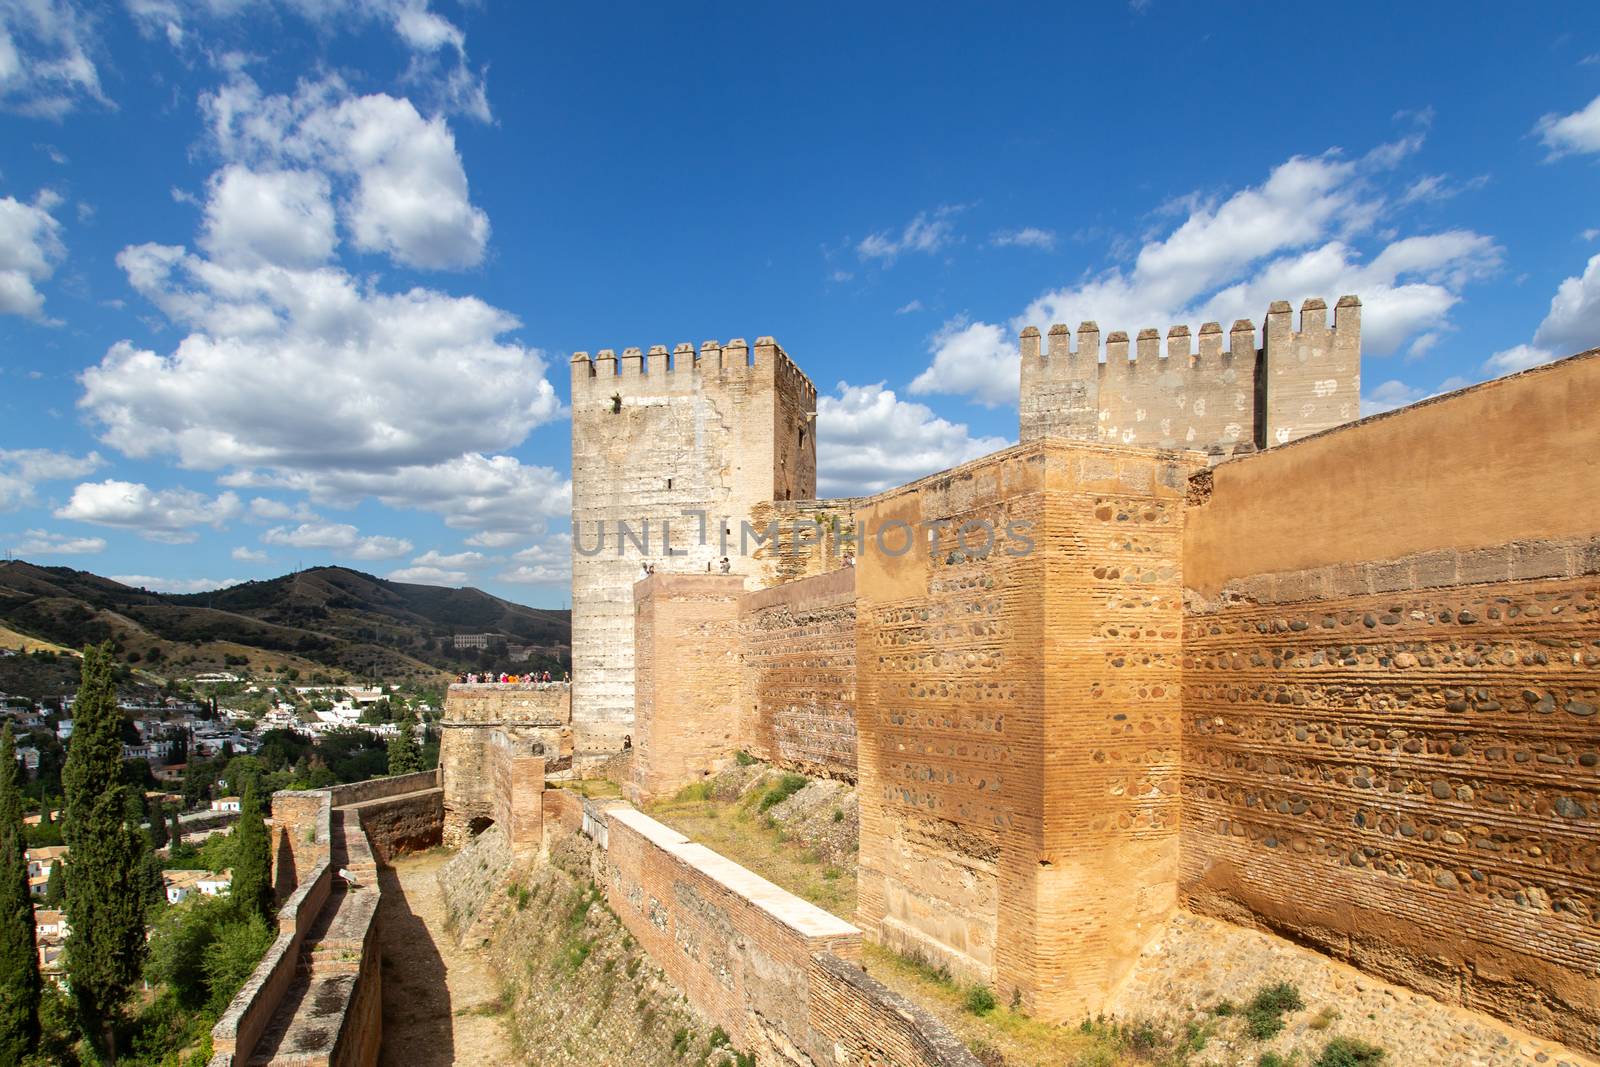 Granada, Spain - May 26, 2019: Exterior view of towers and walls at the famous Alhambra Palace